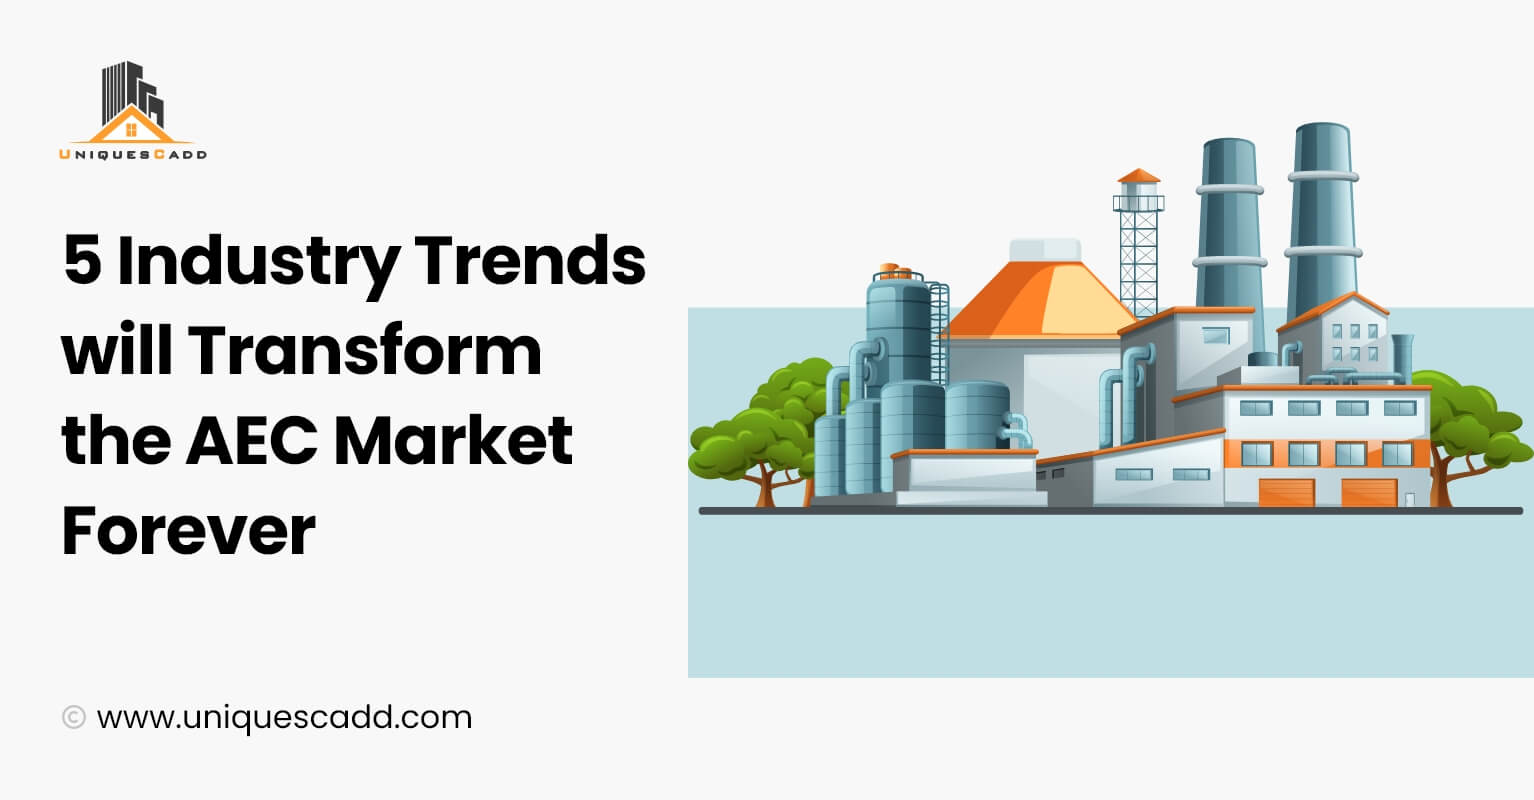 5 Industry Trends will Transform the AEC Market Forever